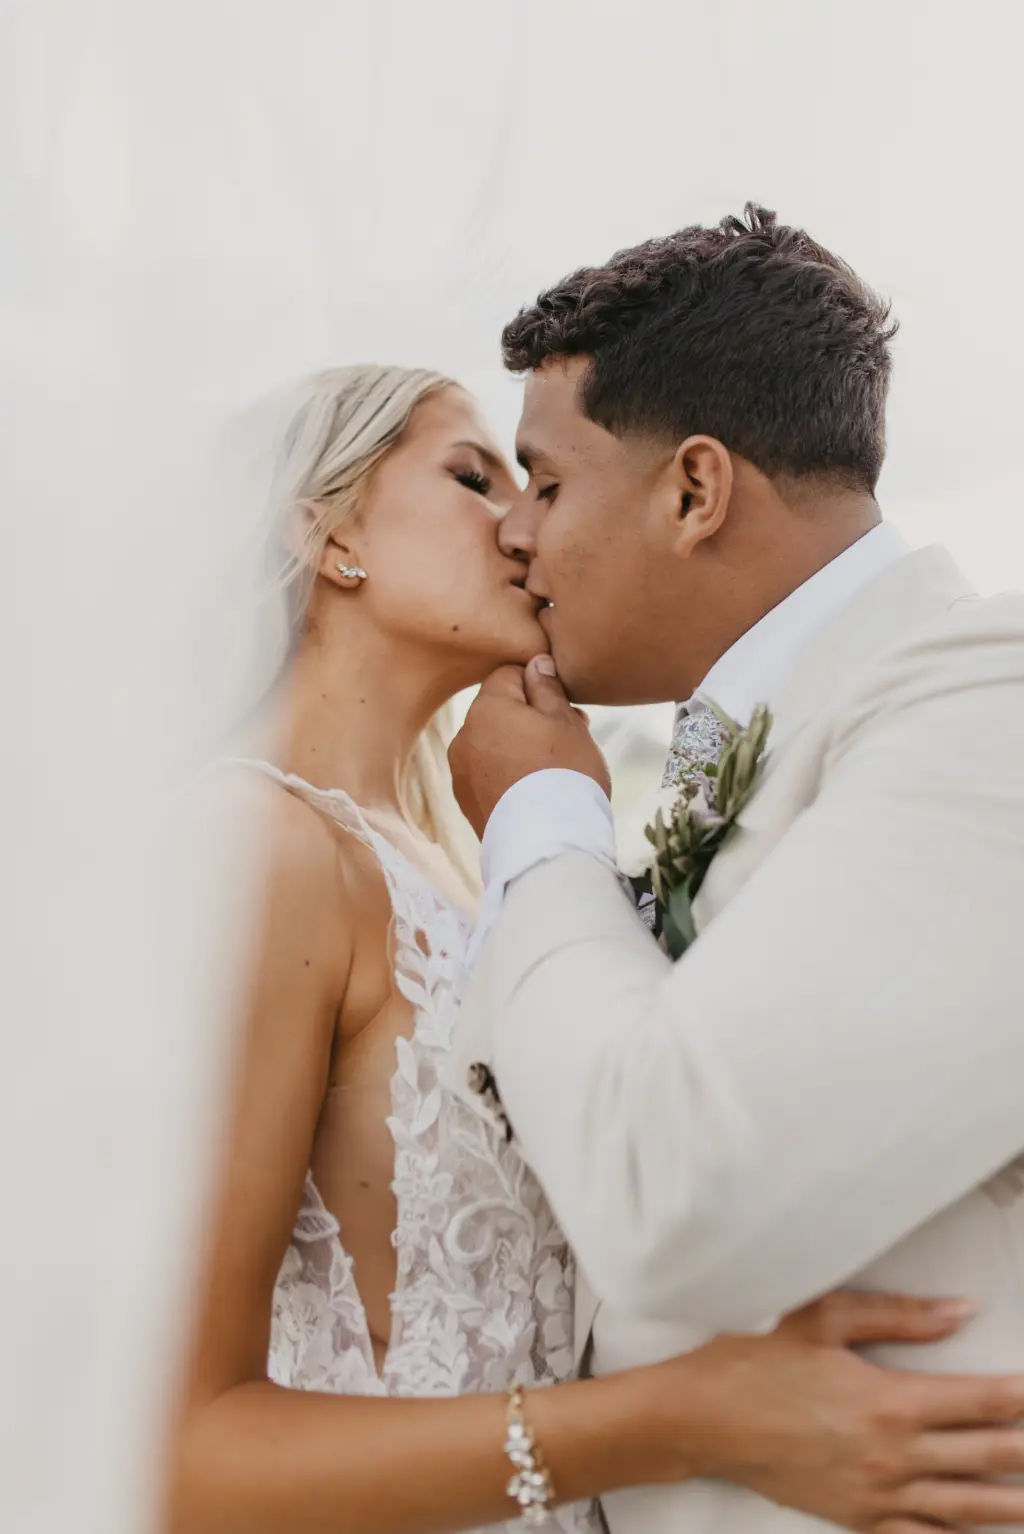 Intimate Bride and Groom Wedding Portrait | Tampa Bay Photographer Valentina Rose Photography